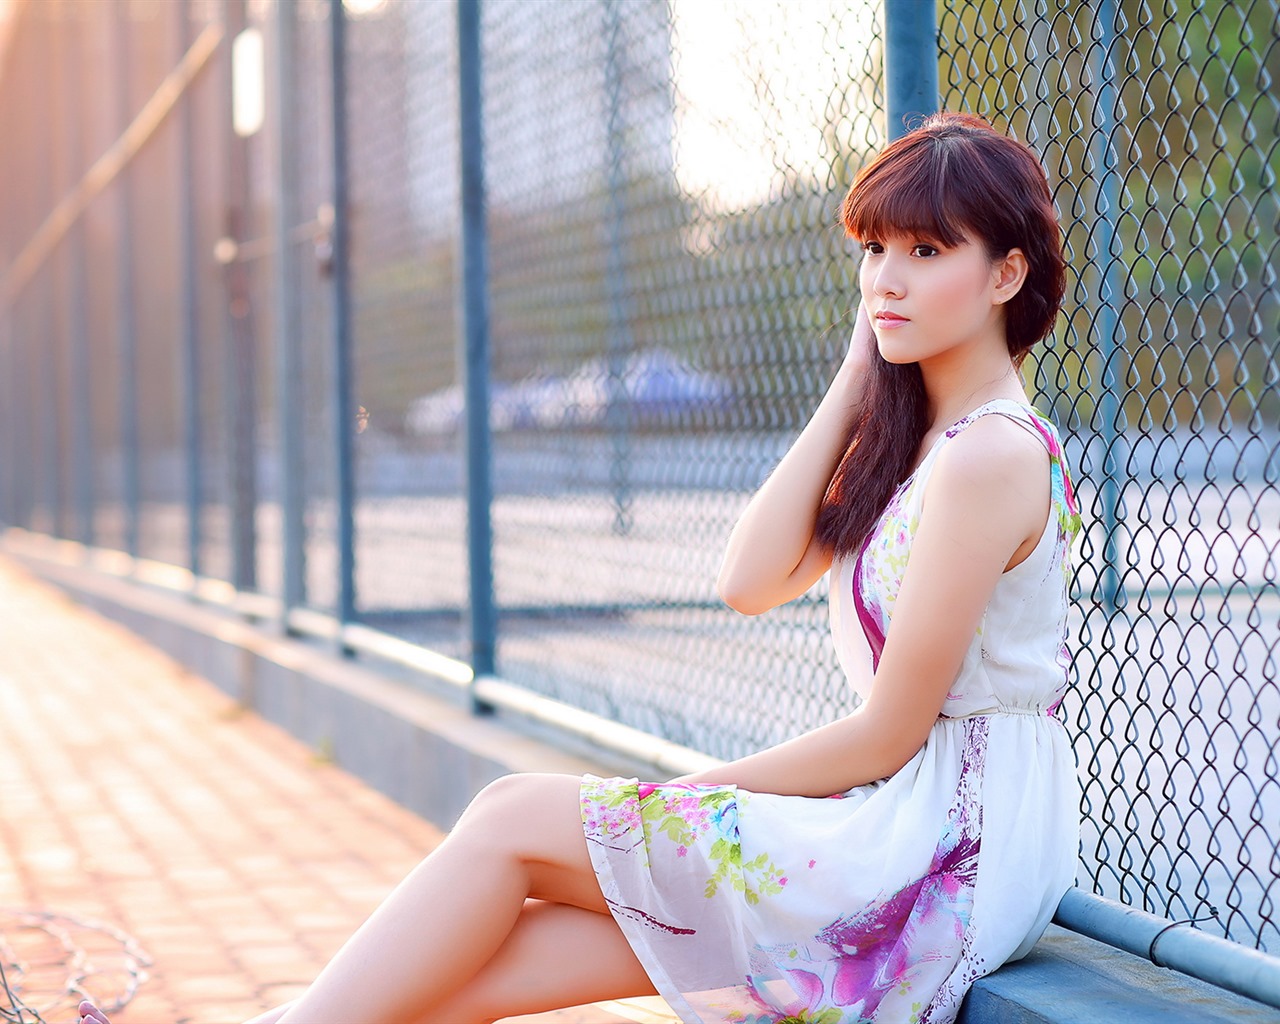 Pure and lovely young Asian girl HD wallpapers collection (5) #31 - 1280x1024